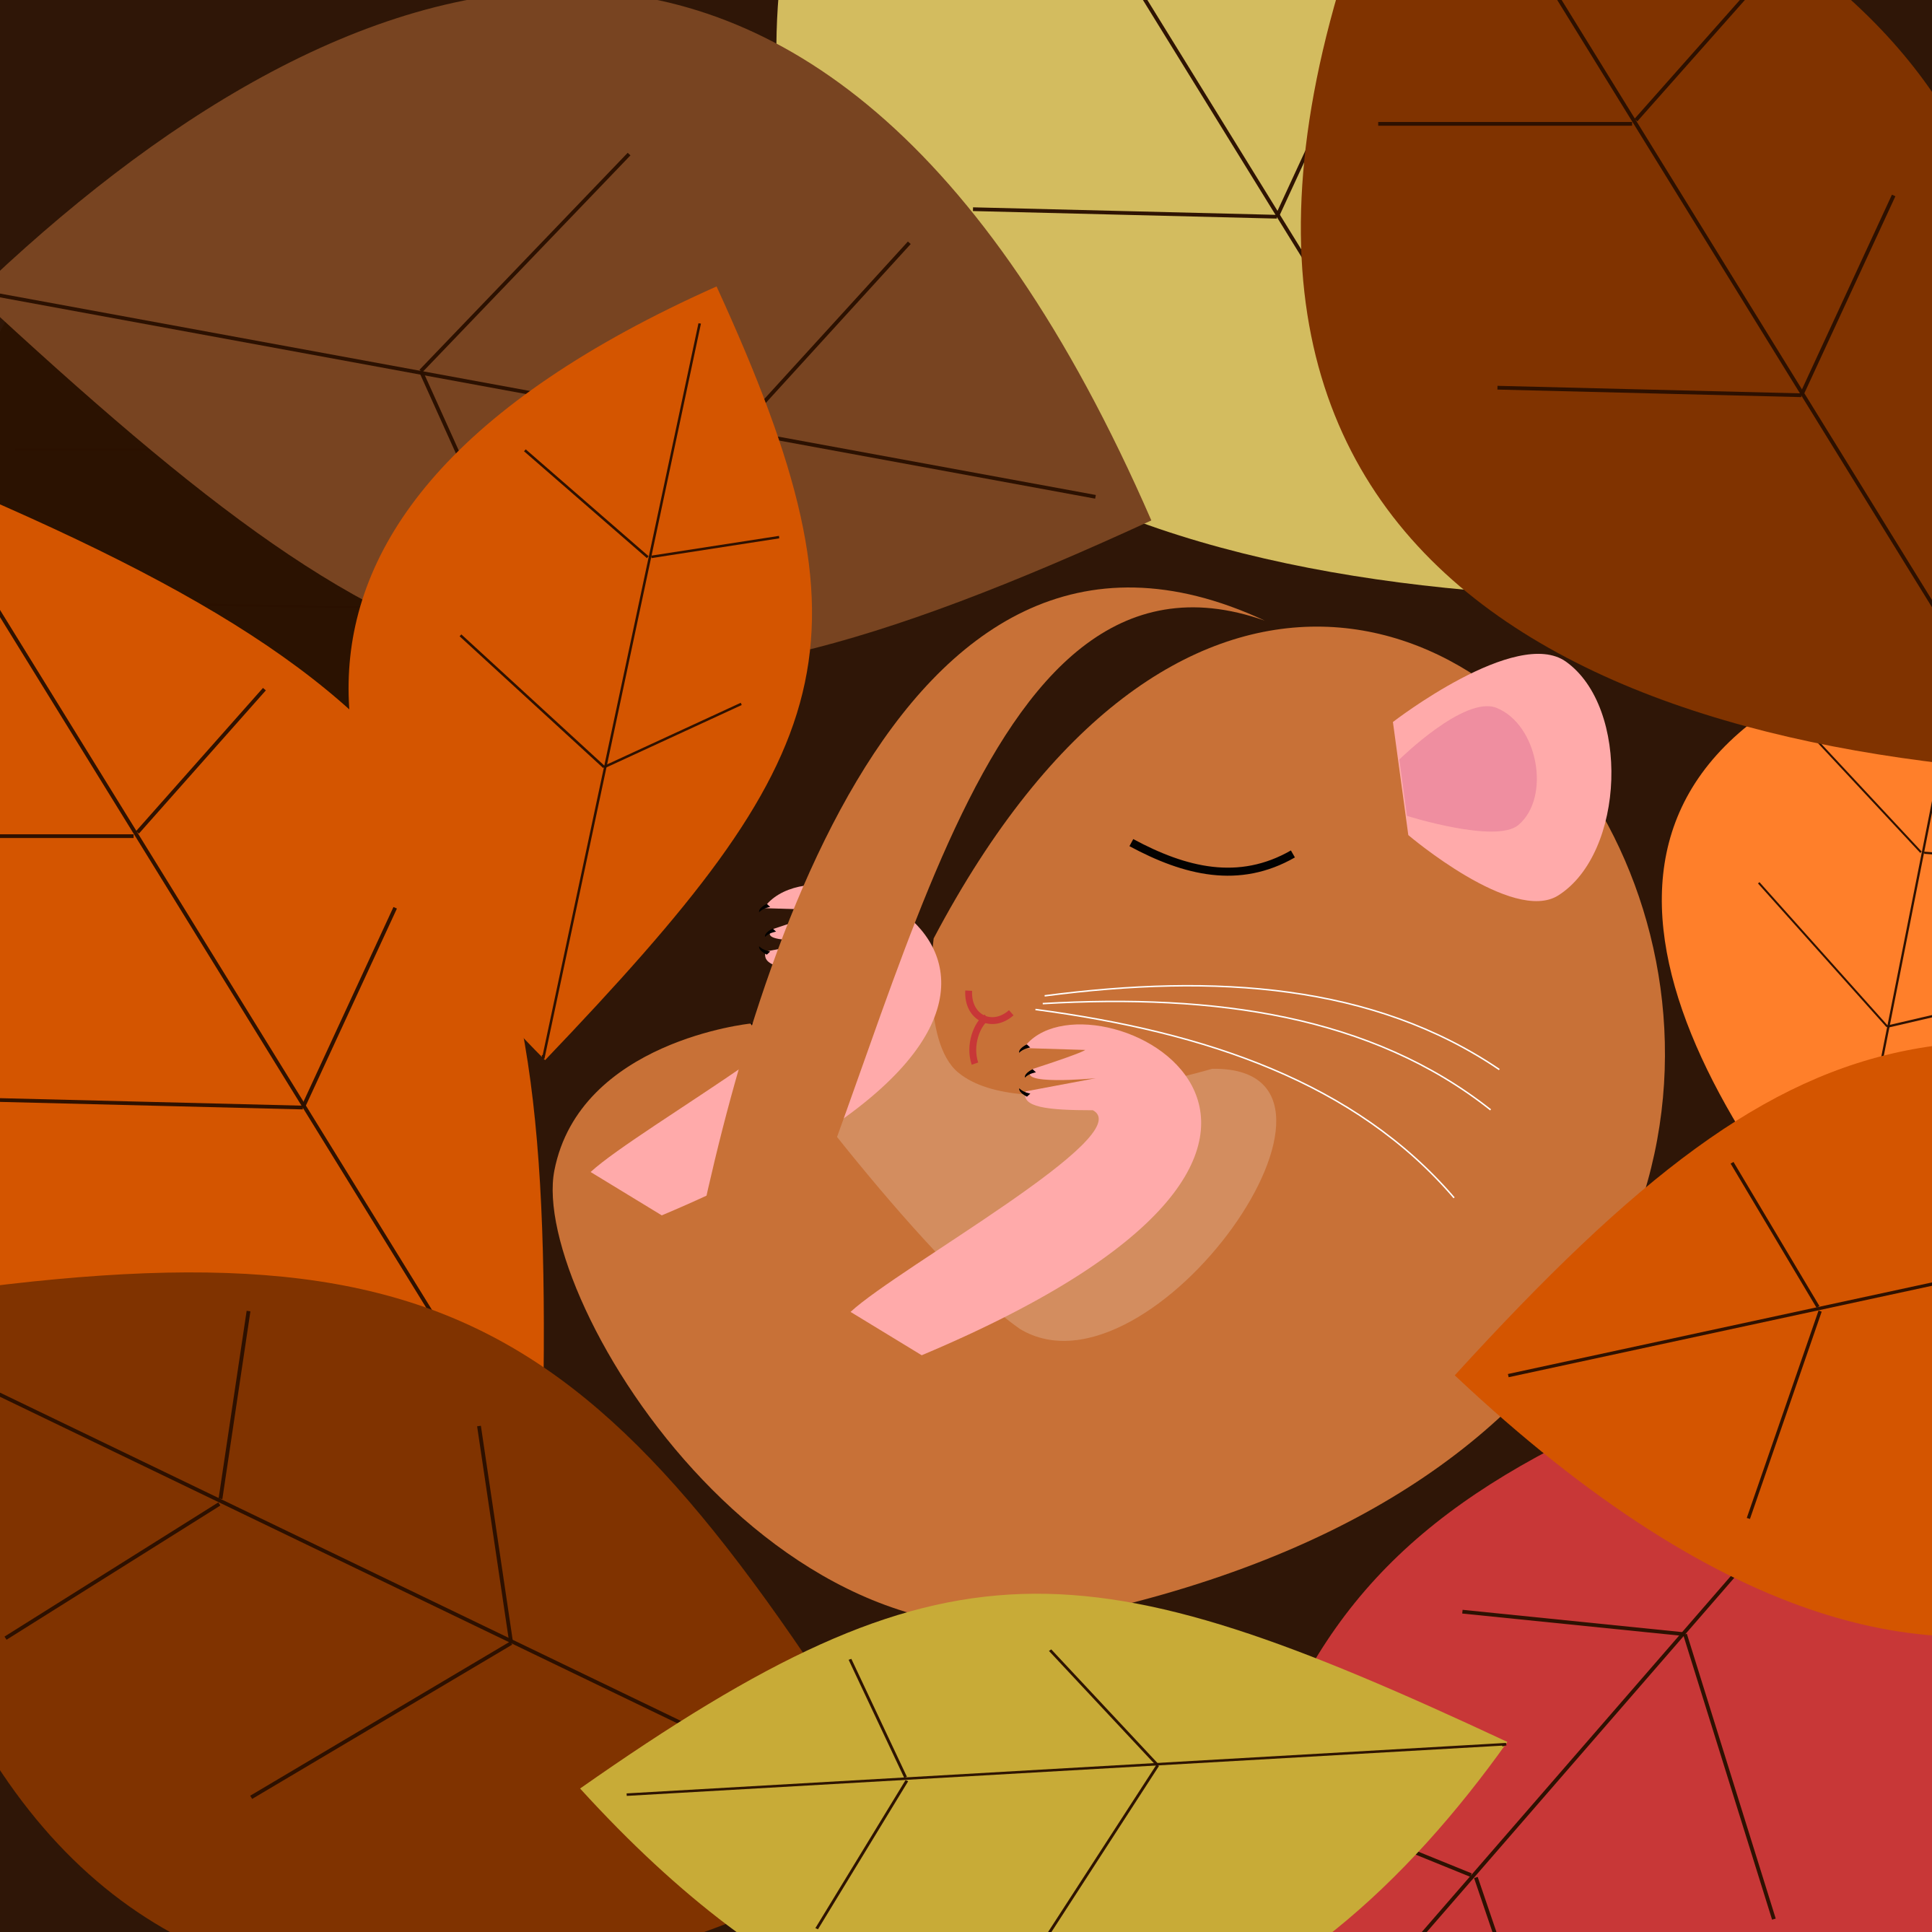 a doormouse slleeping soundly amongst autumn leaves. Simply drawn with flat bold colours on a white background